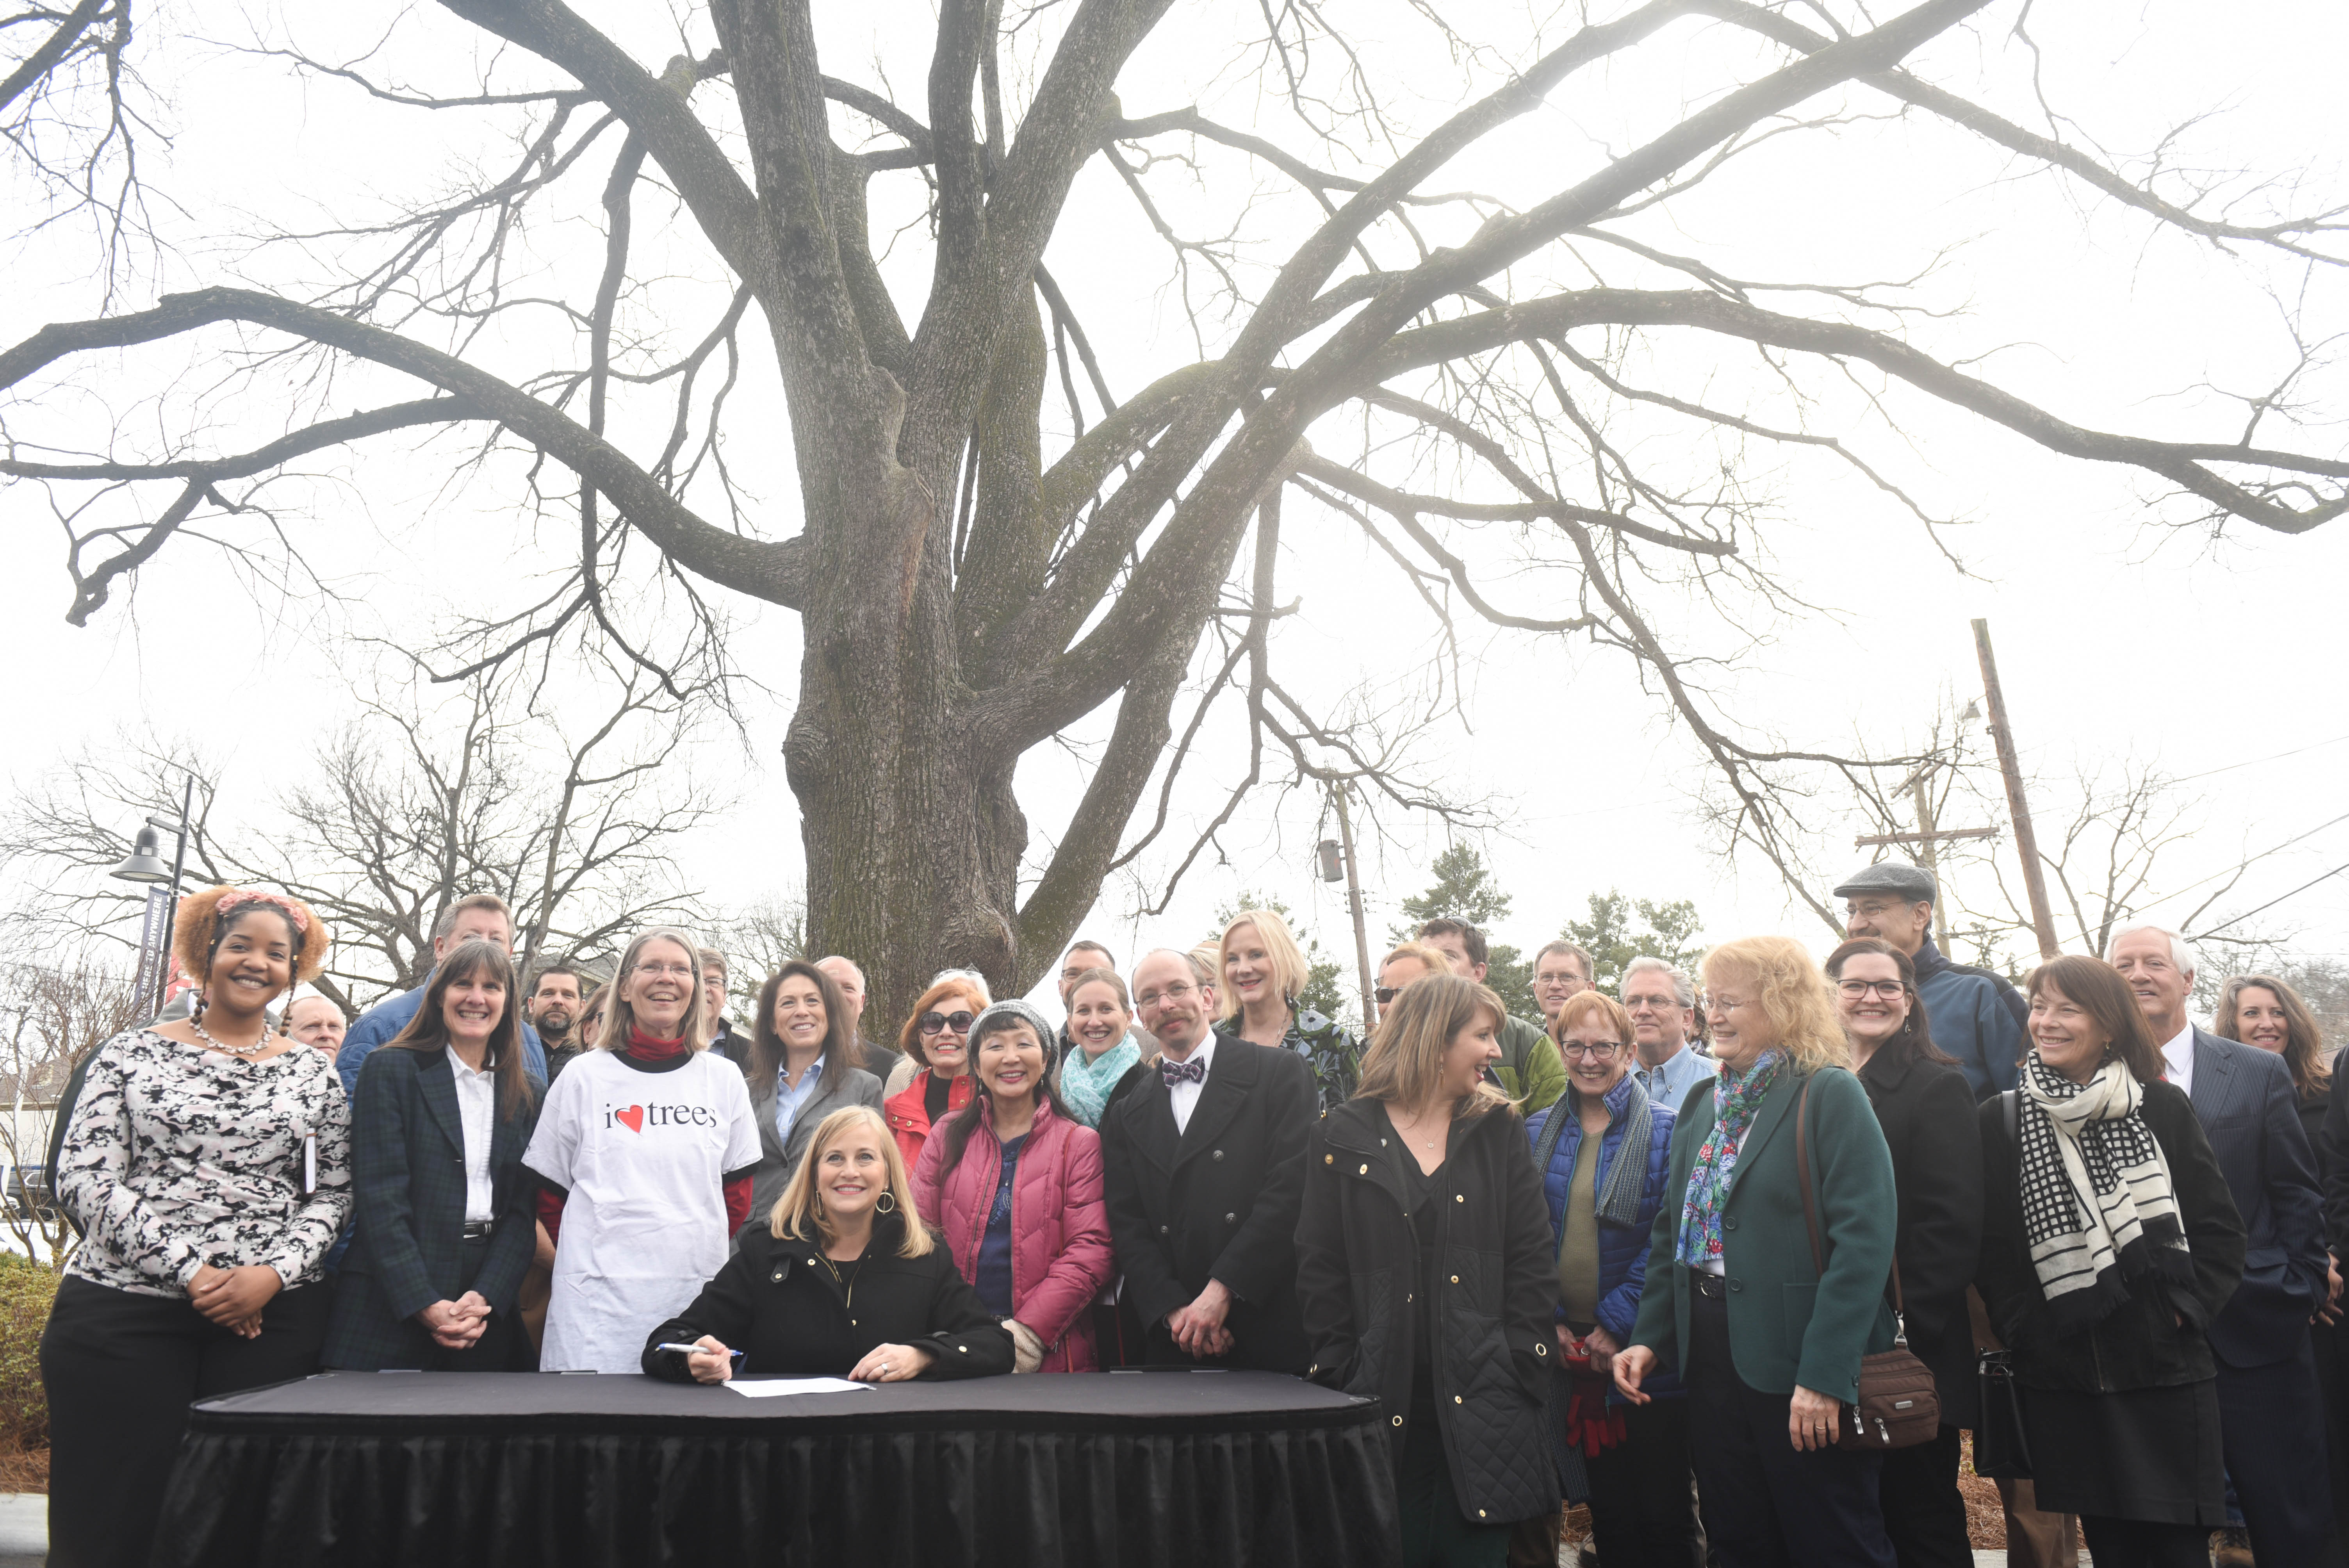 Mayor Barry to Sign New Executive Order to Help Preserve, Grow Countywide Tree Canopy at Belmont University Nashville, Tennessee, February 13, 2018.